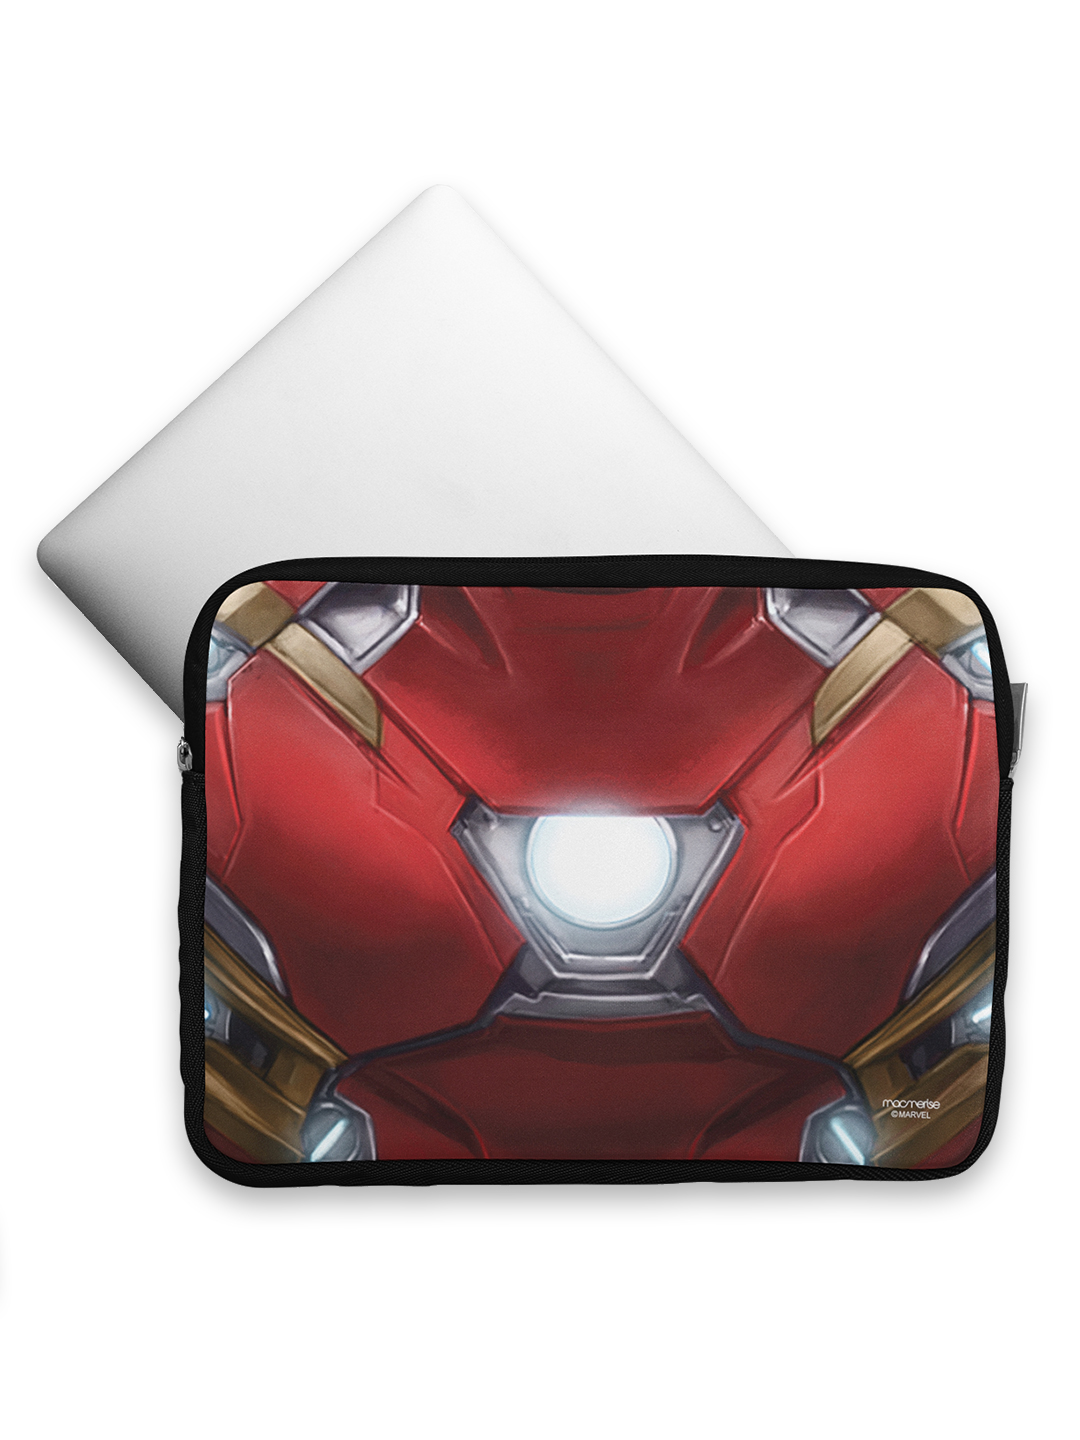 Suit up Ironman - Printed Laptop Sleeves (15 inch)